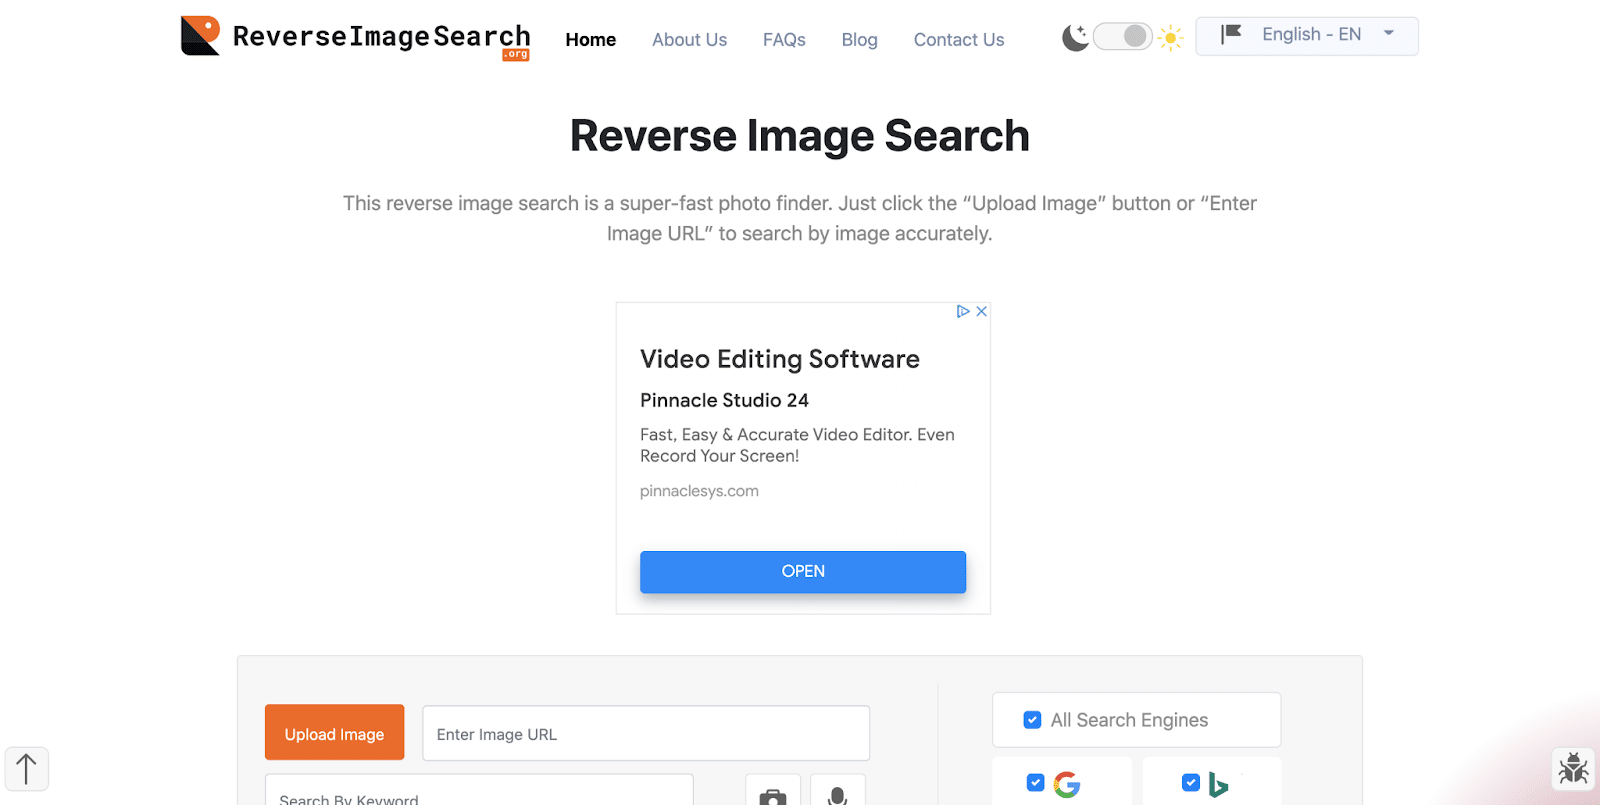 Reverse Image Search homepage.